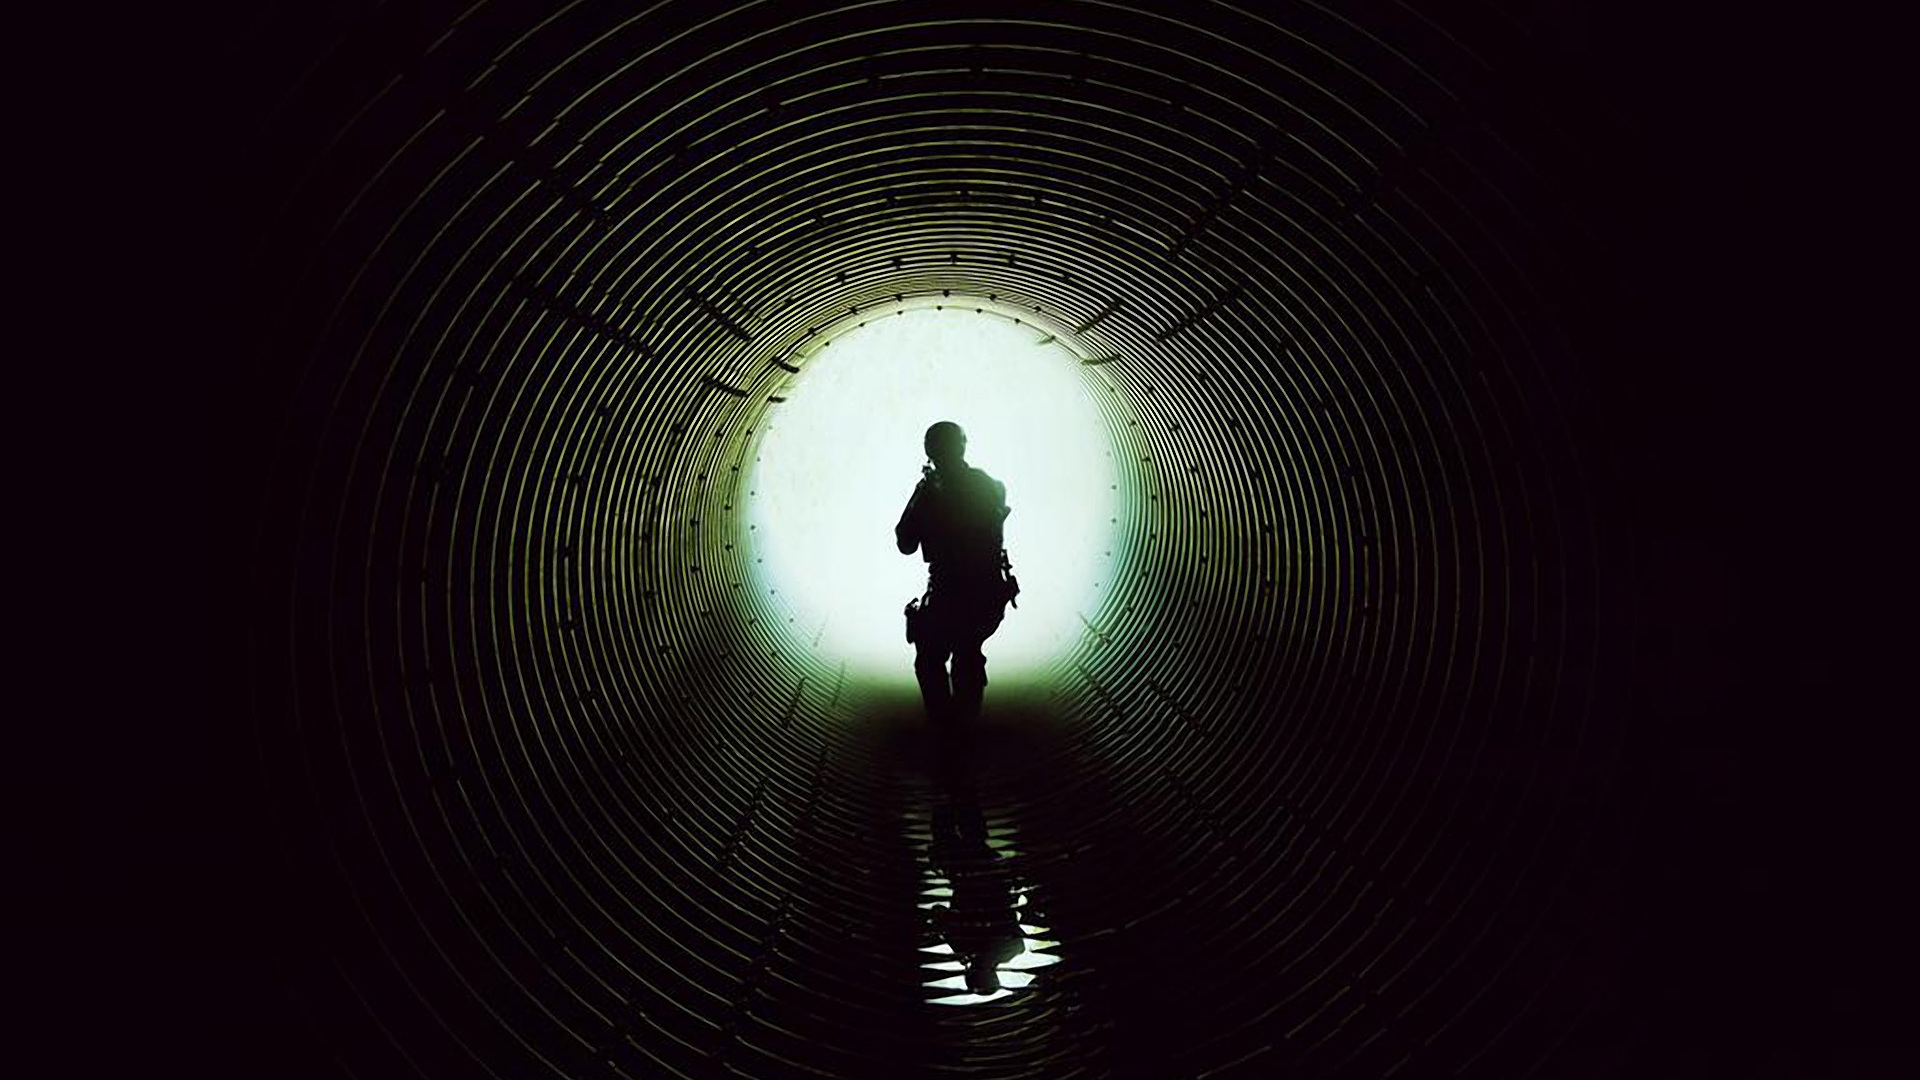 Sicario Sewer Tunnel for 1920 x 1080 HDTV 1080p resolution